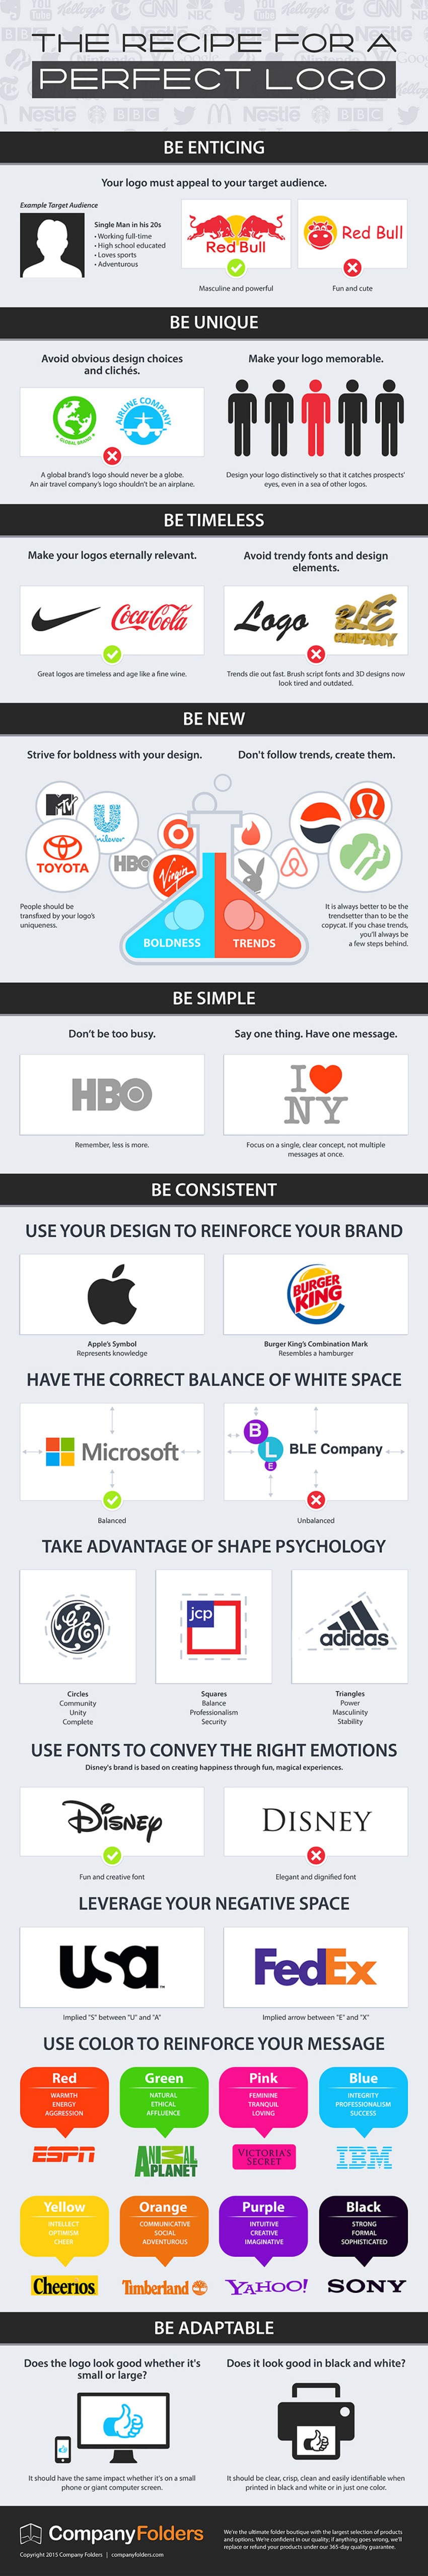 Recipe for a Perfect Logo - Design Web Kit | The MarTech Digest | Scoop.it